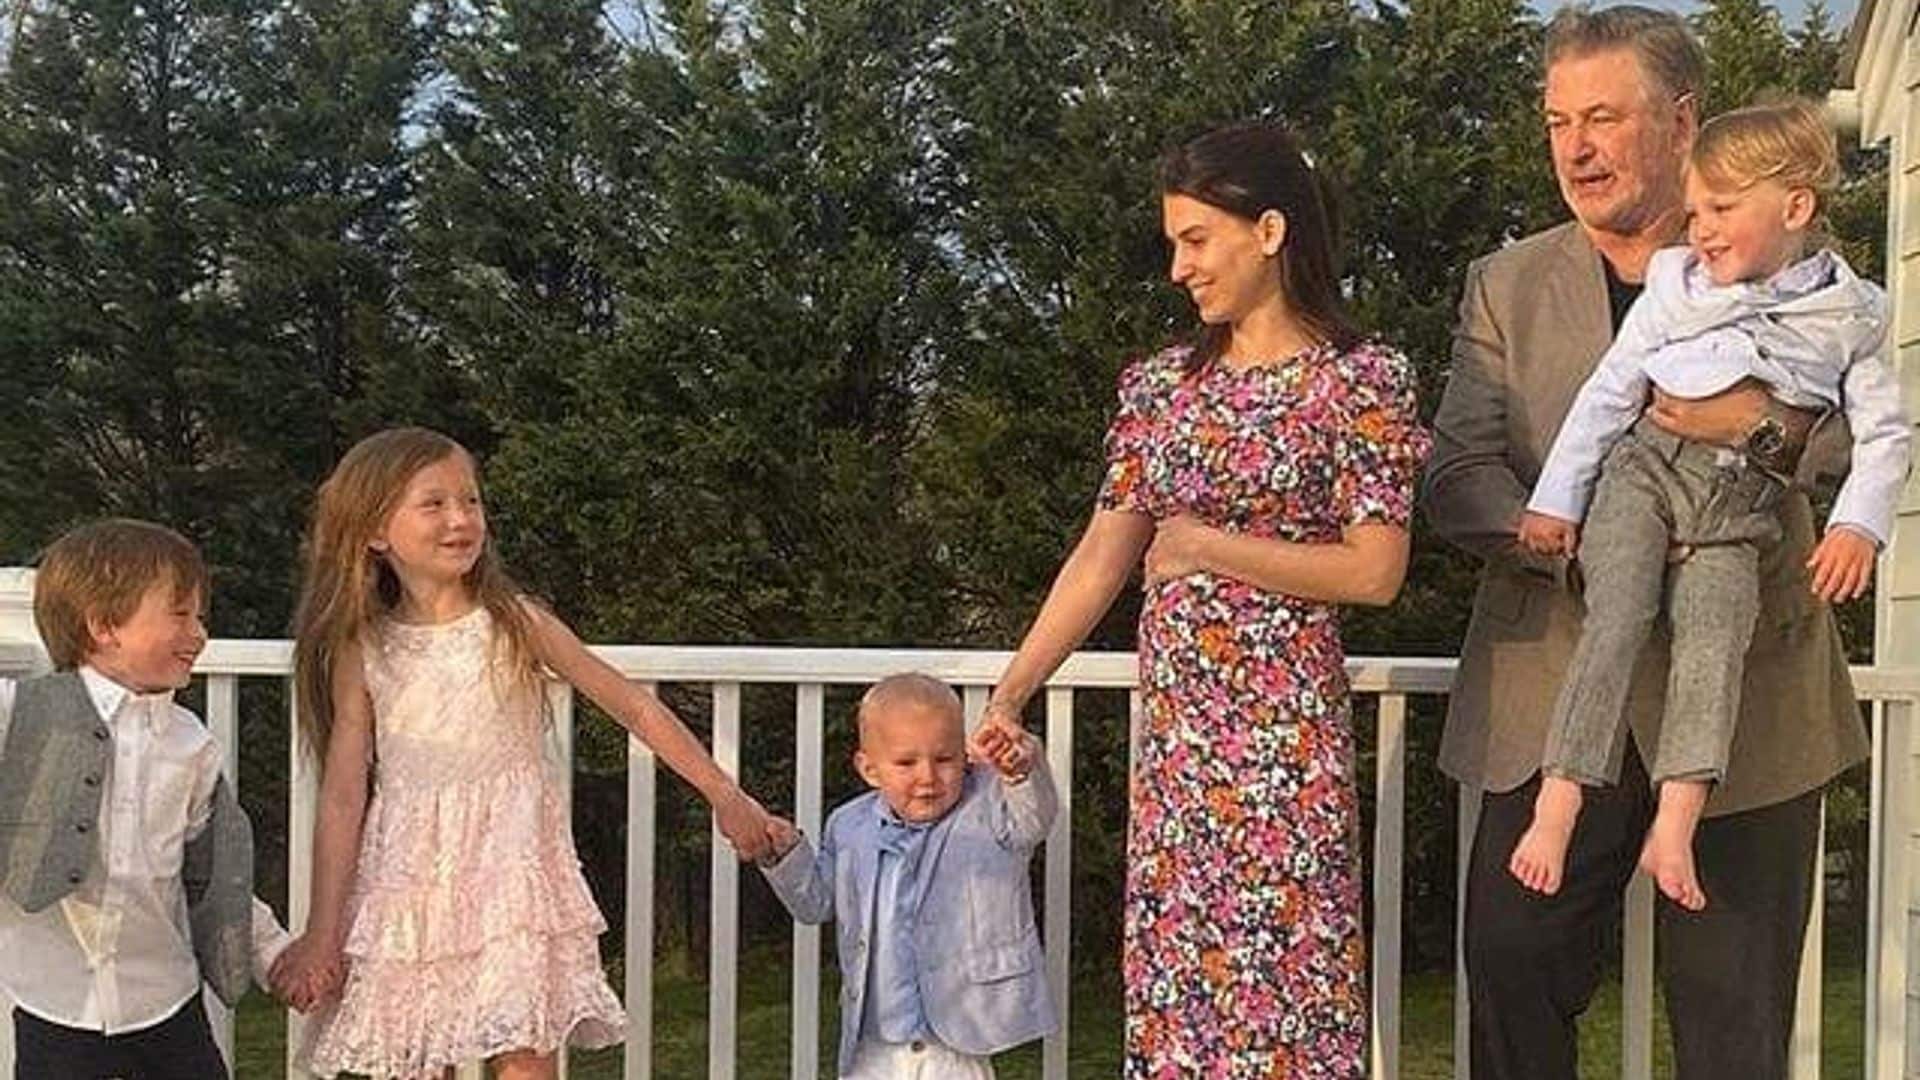 Pregnant Hilaria Baldwin talks being a parent during COVID-19: ‘If you don’t laugh, you cry’